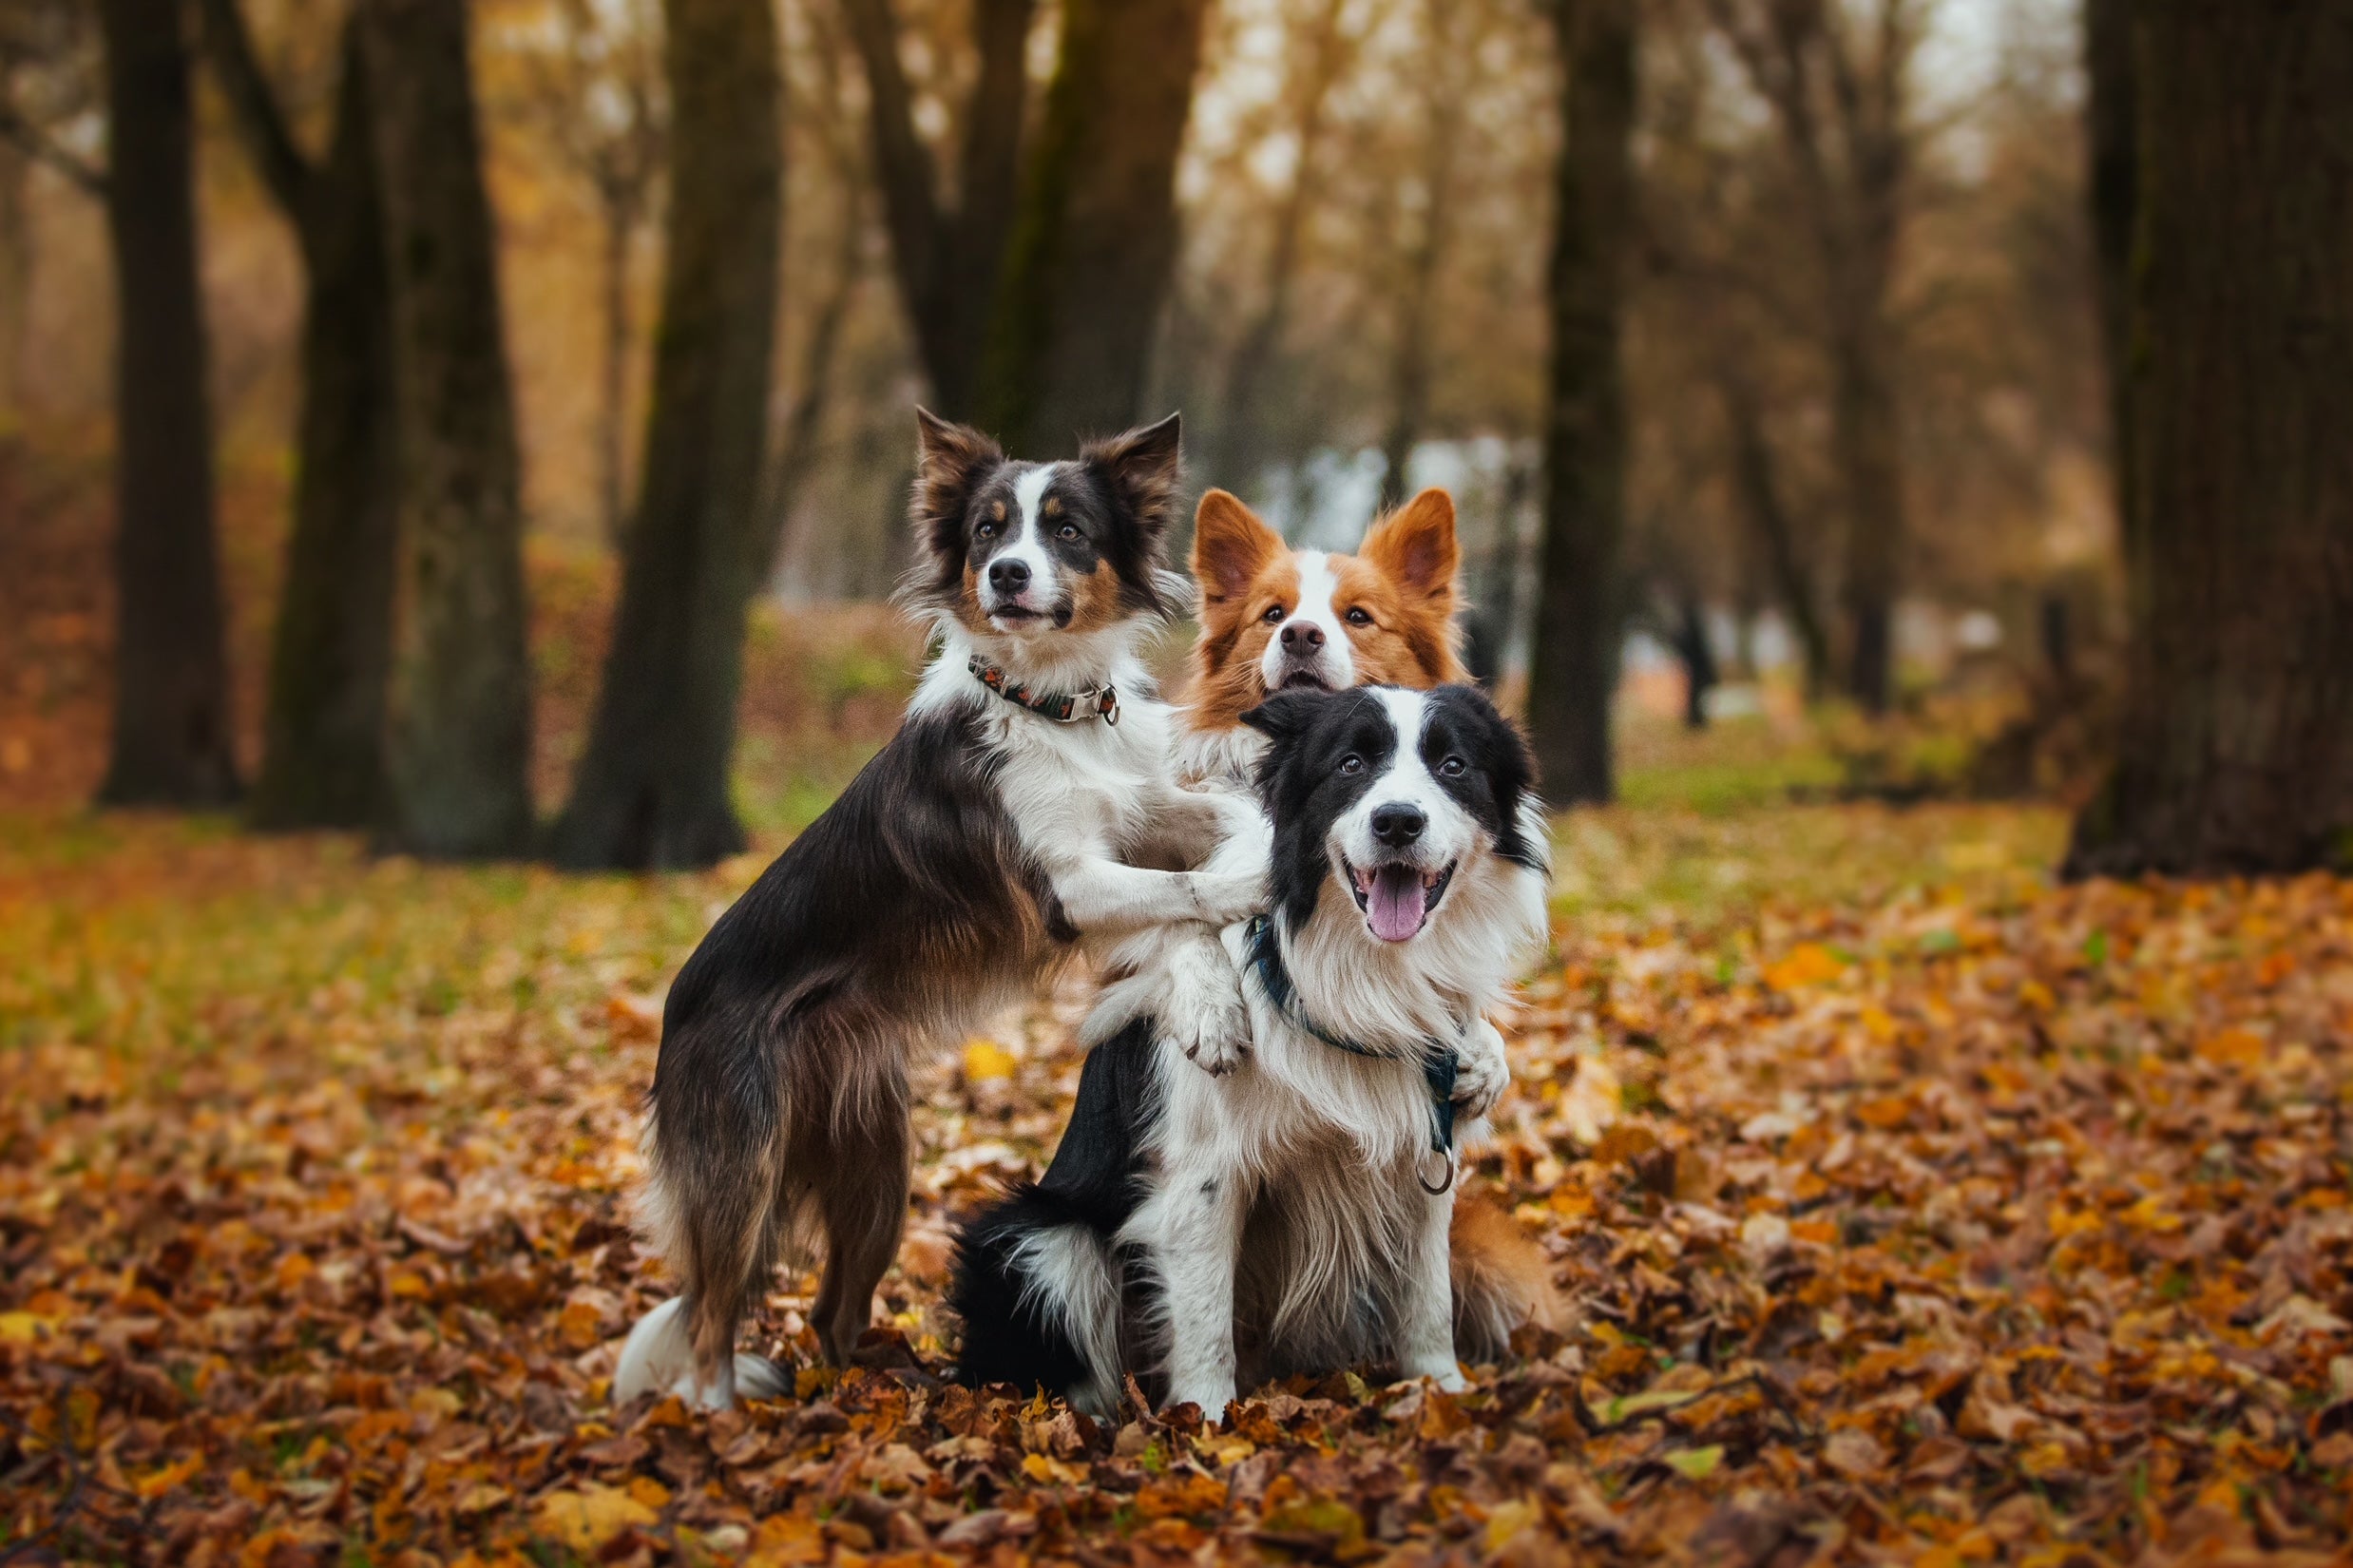 What Are the Most Active Dog Breeds?